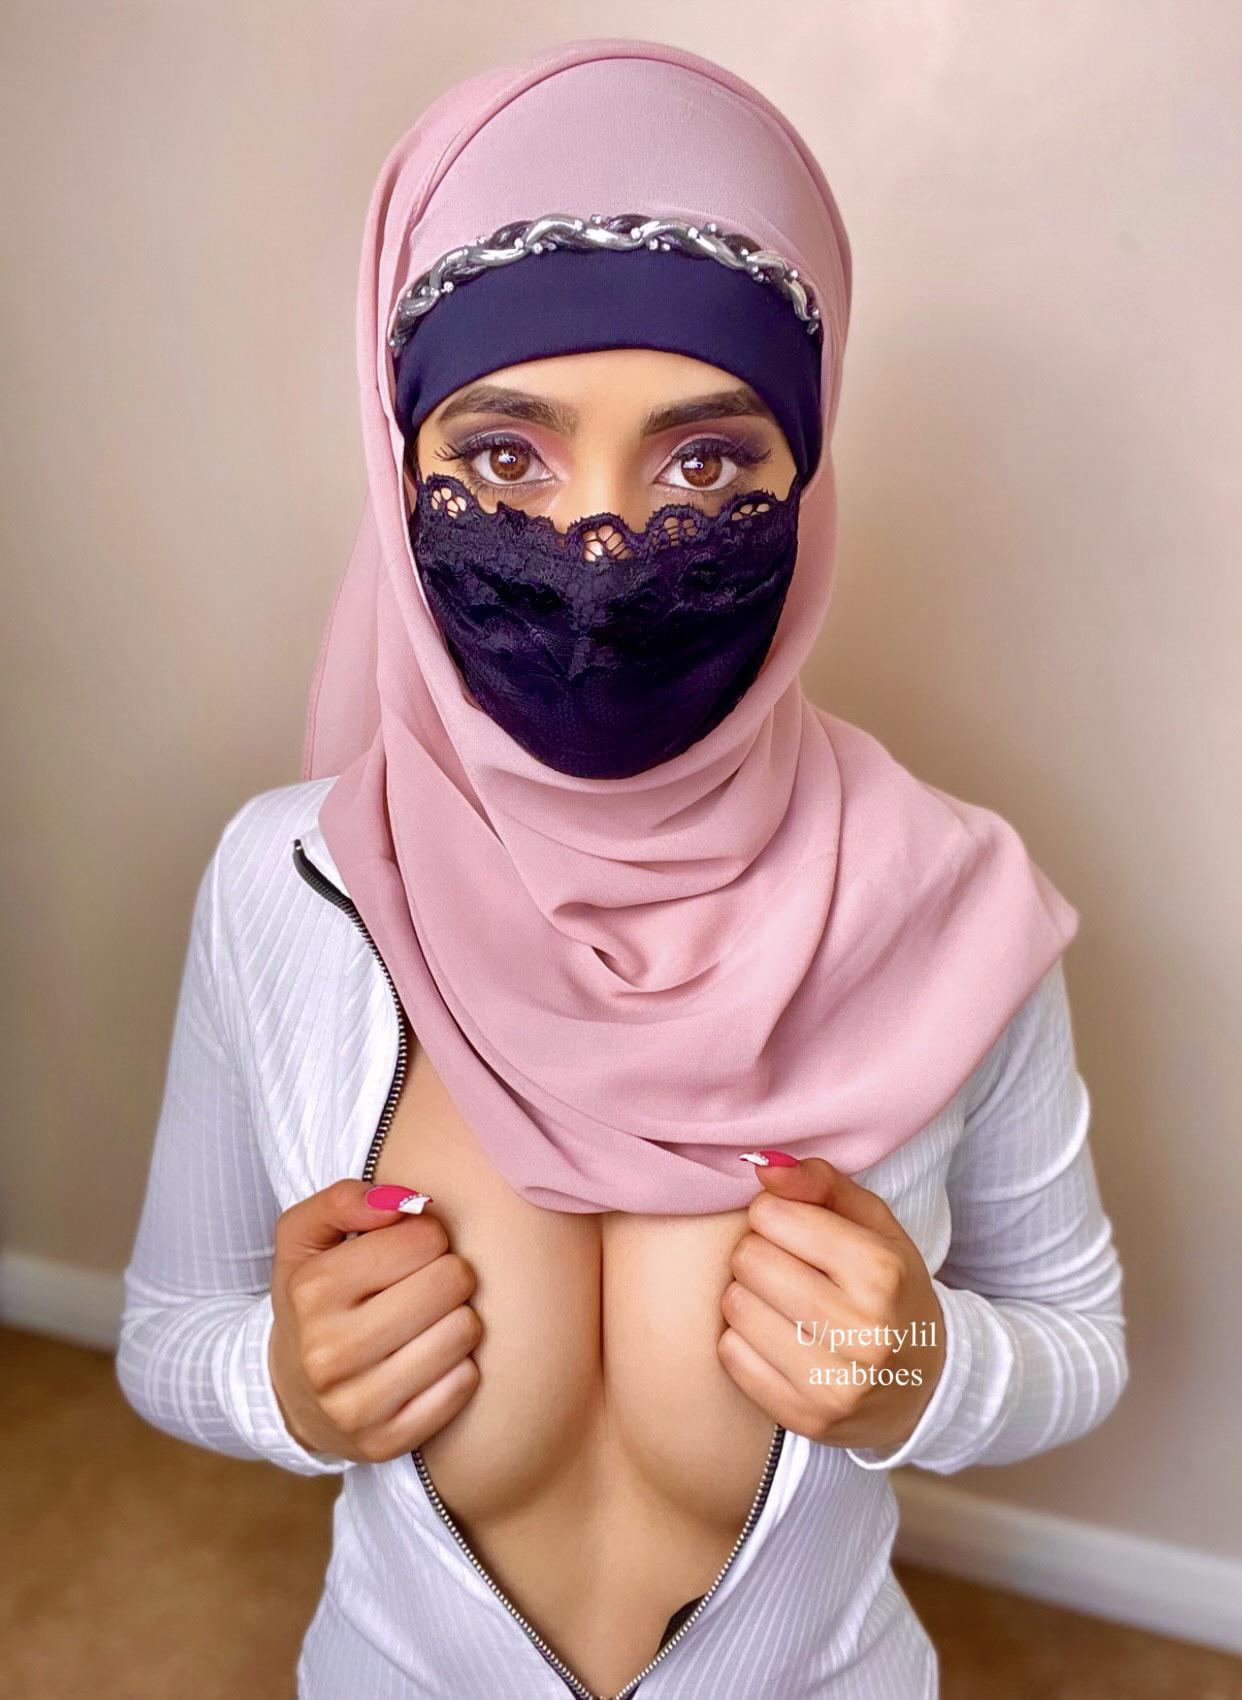 Hey habibi❤️ Im here to find out if I qualify as fuckable? picture picture